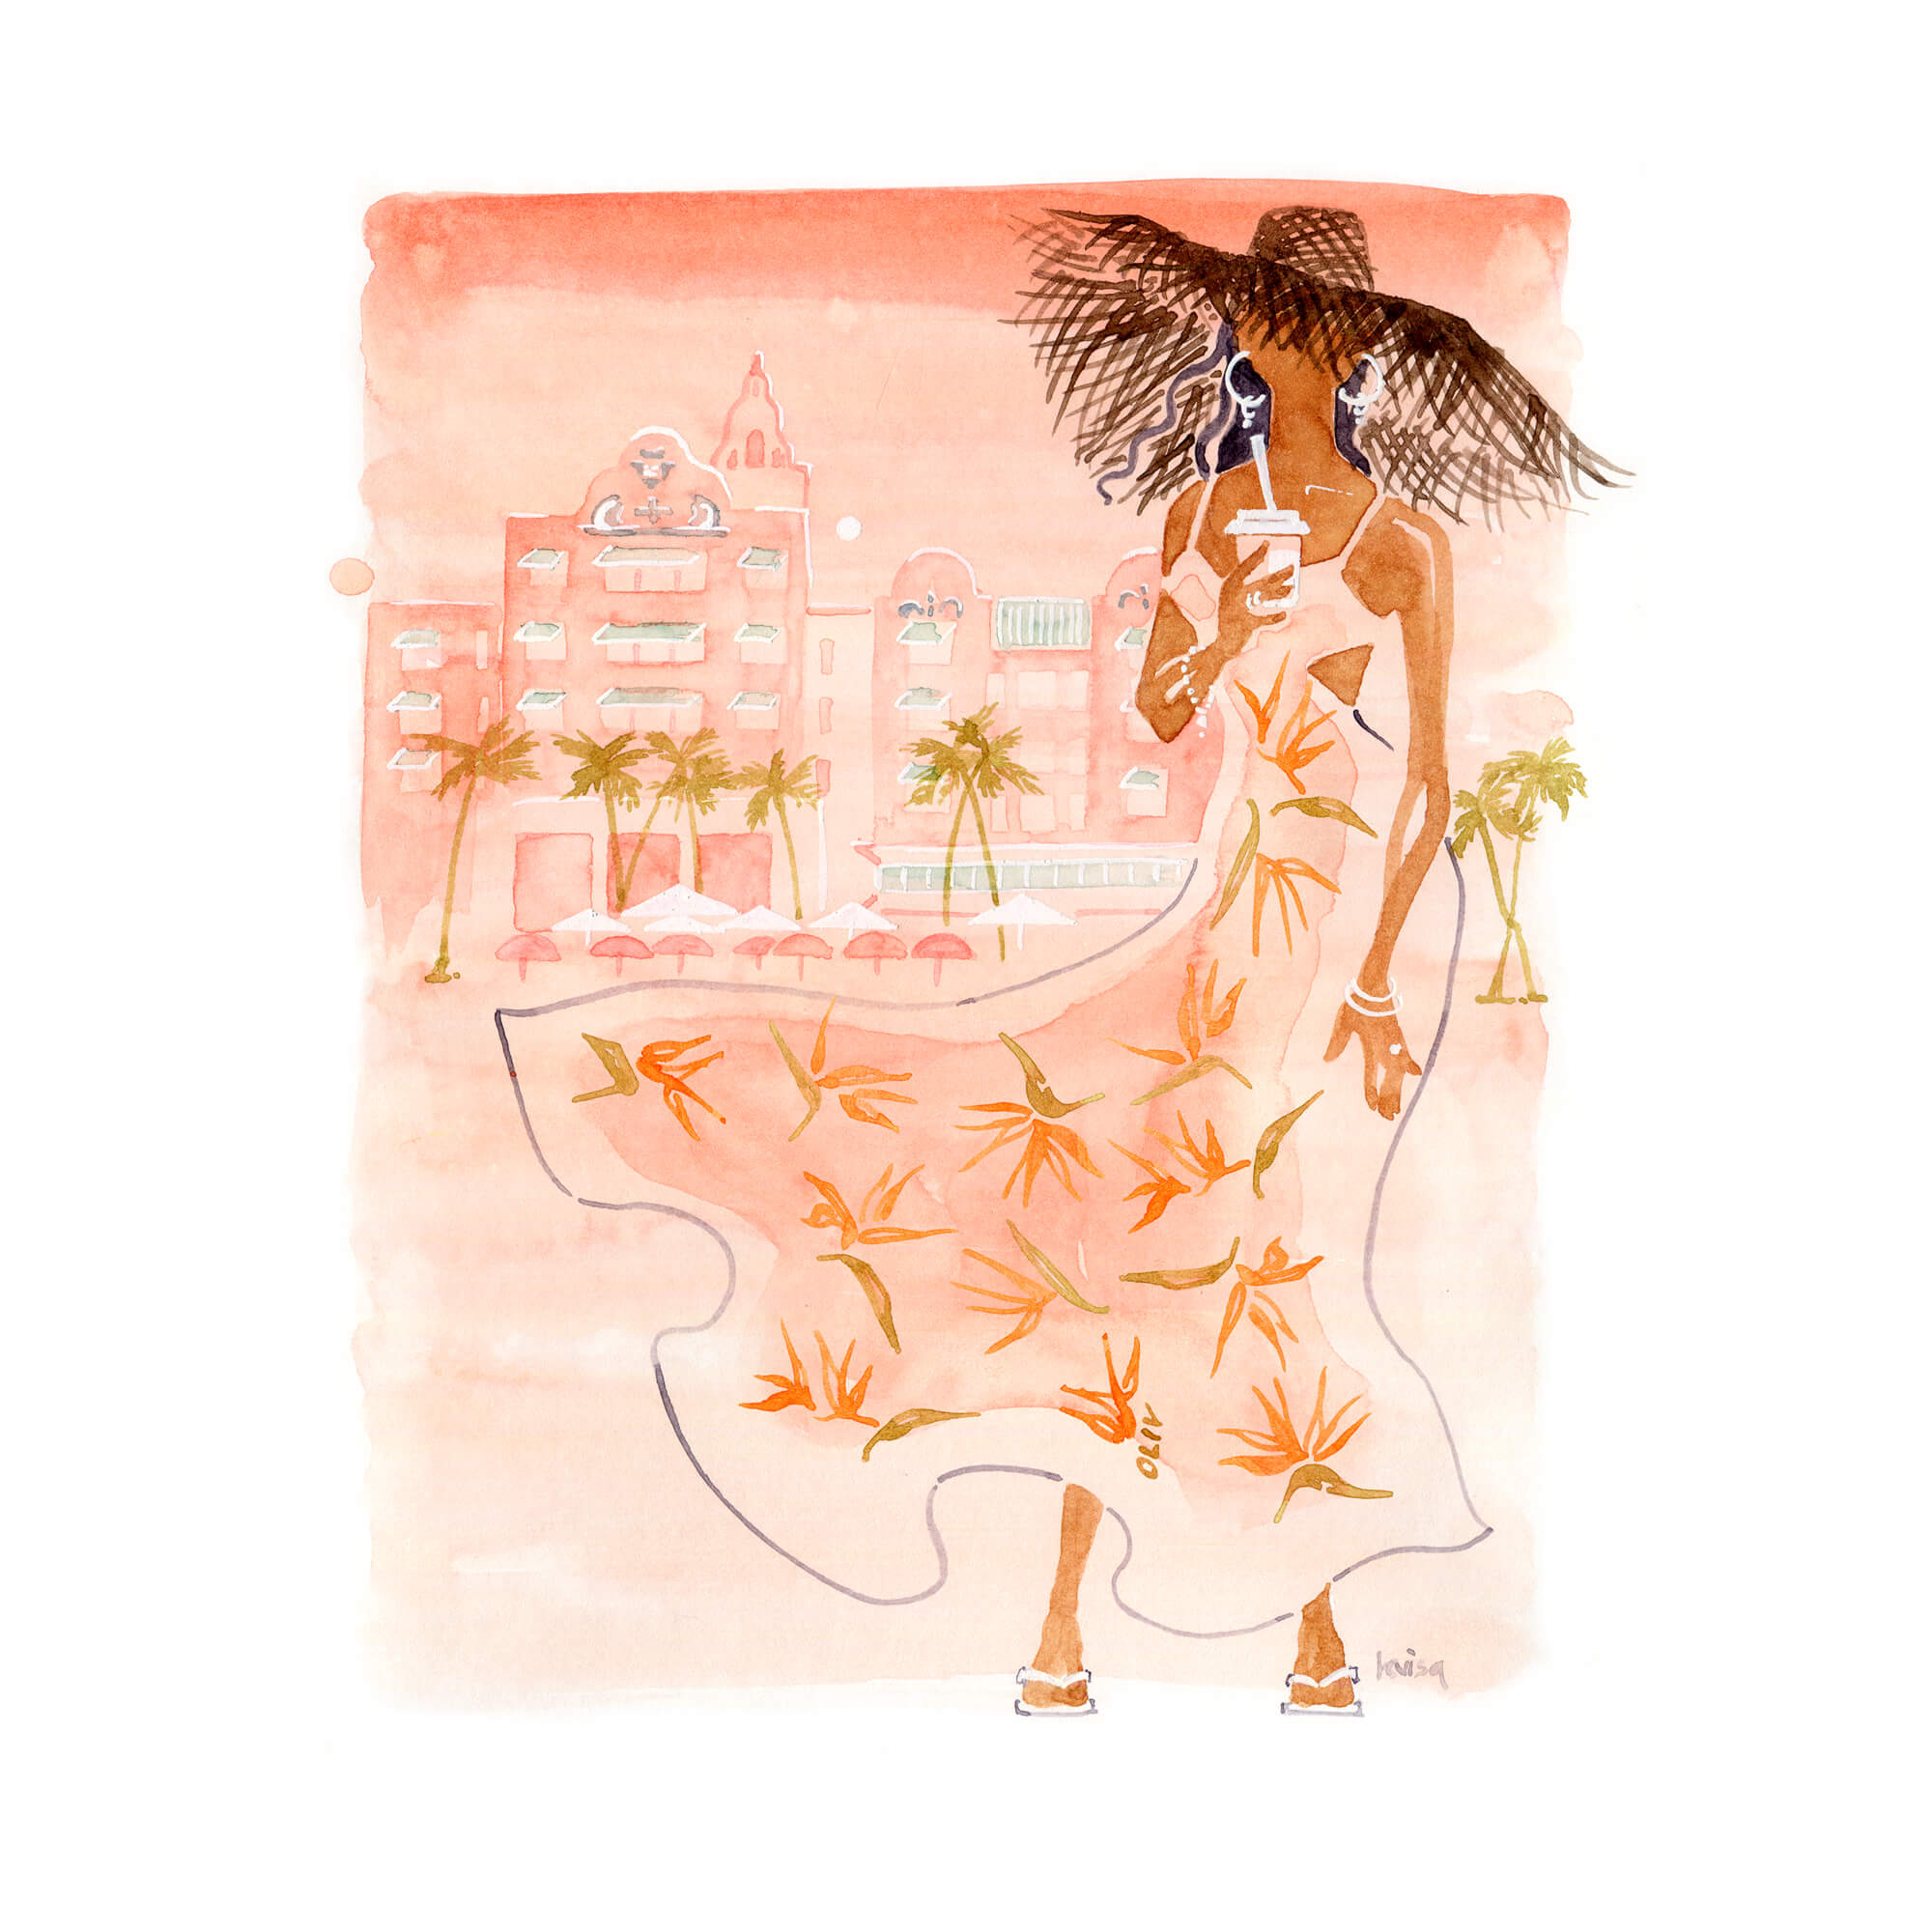 A paper giclée print of a watercolor artwork featuring a fashionable woman in front of Royal Hawaiian Hotel by Hawaii artist Lovisa Oliv